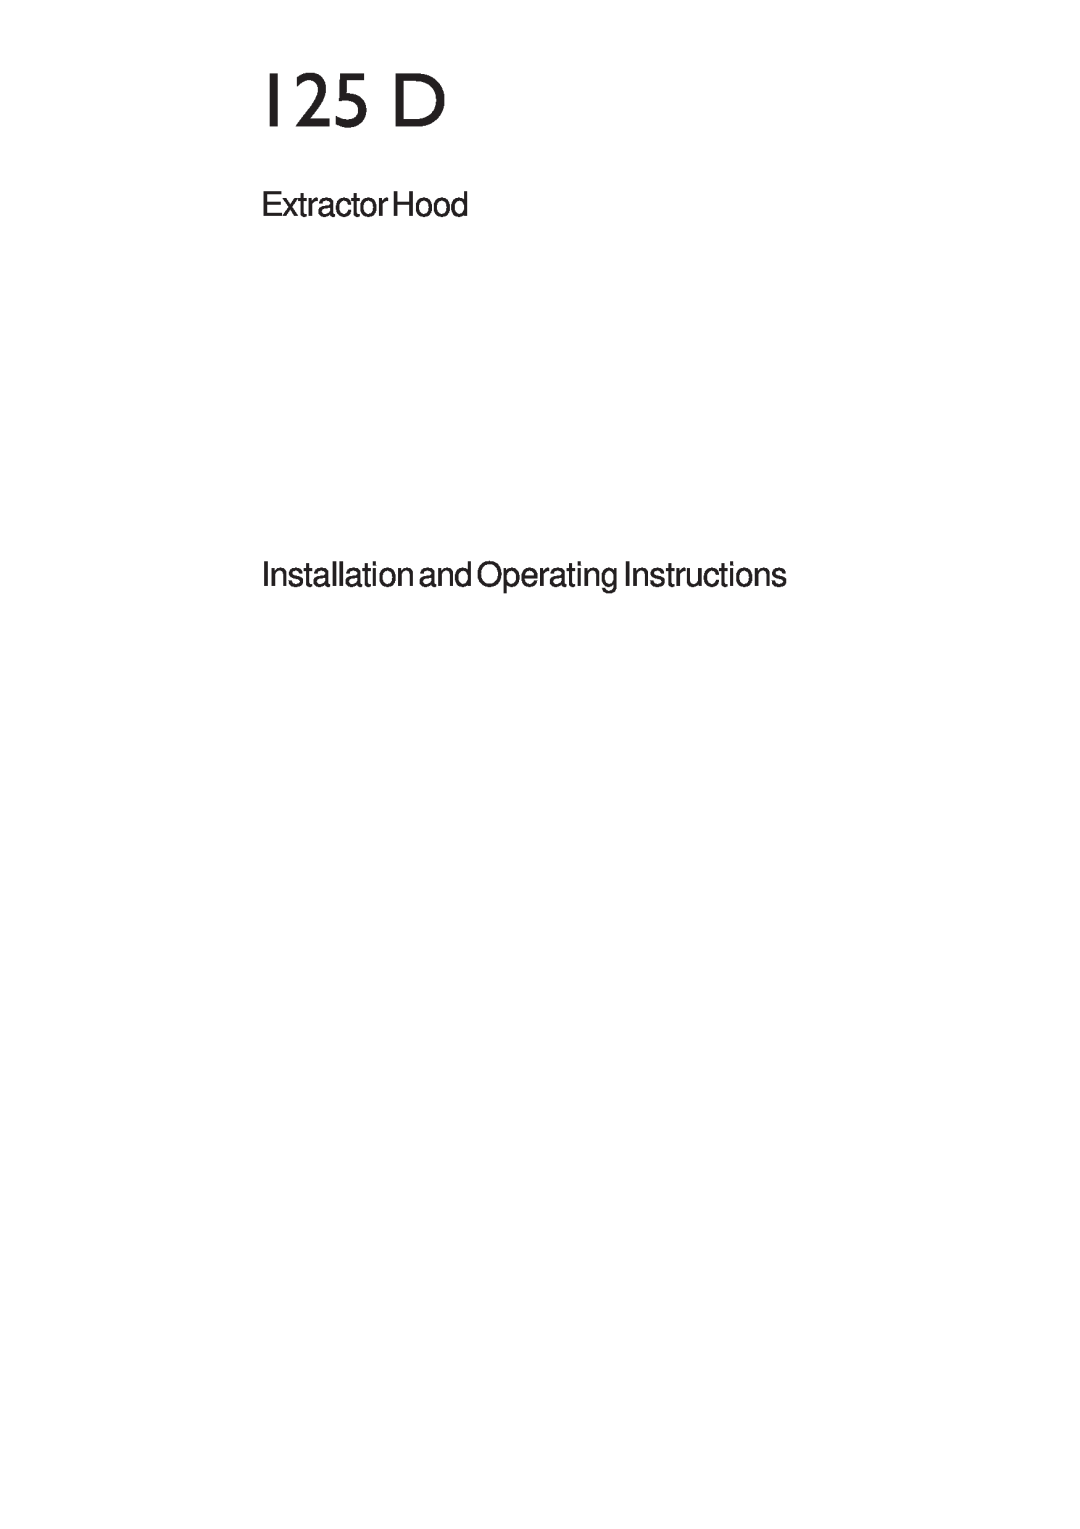 AEG 125 D manual ExtractorHood Installation and Operating Instructions 